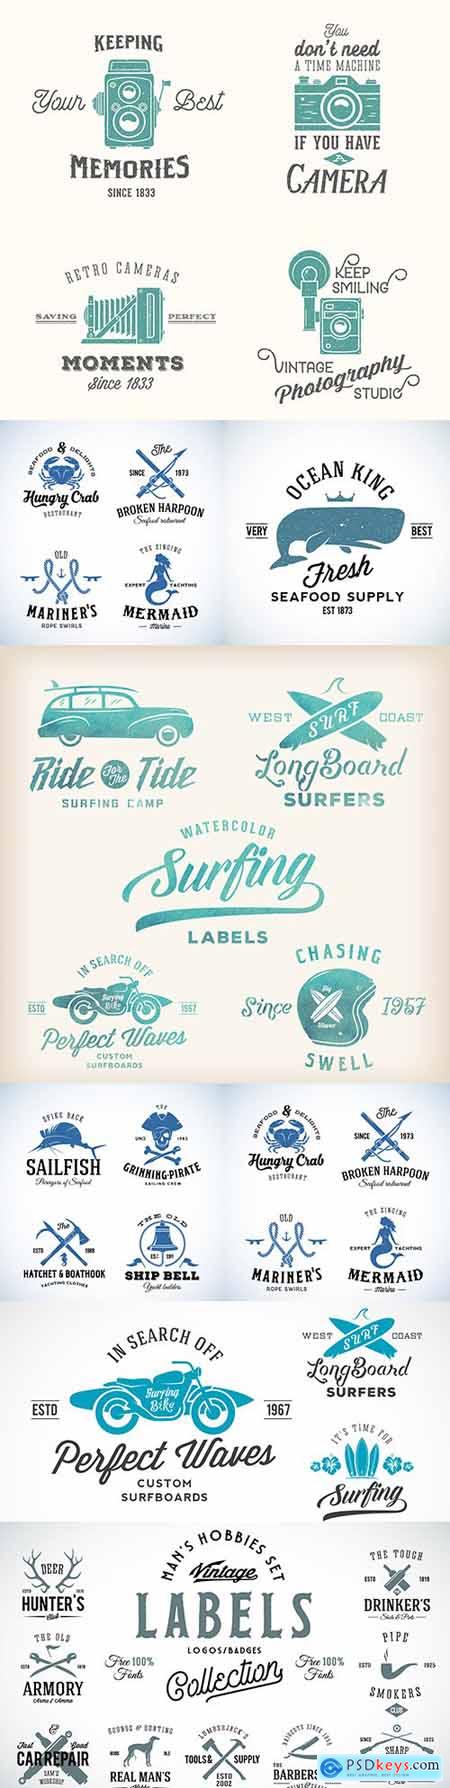 Vintage logo and template with retro typography men s hobbies